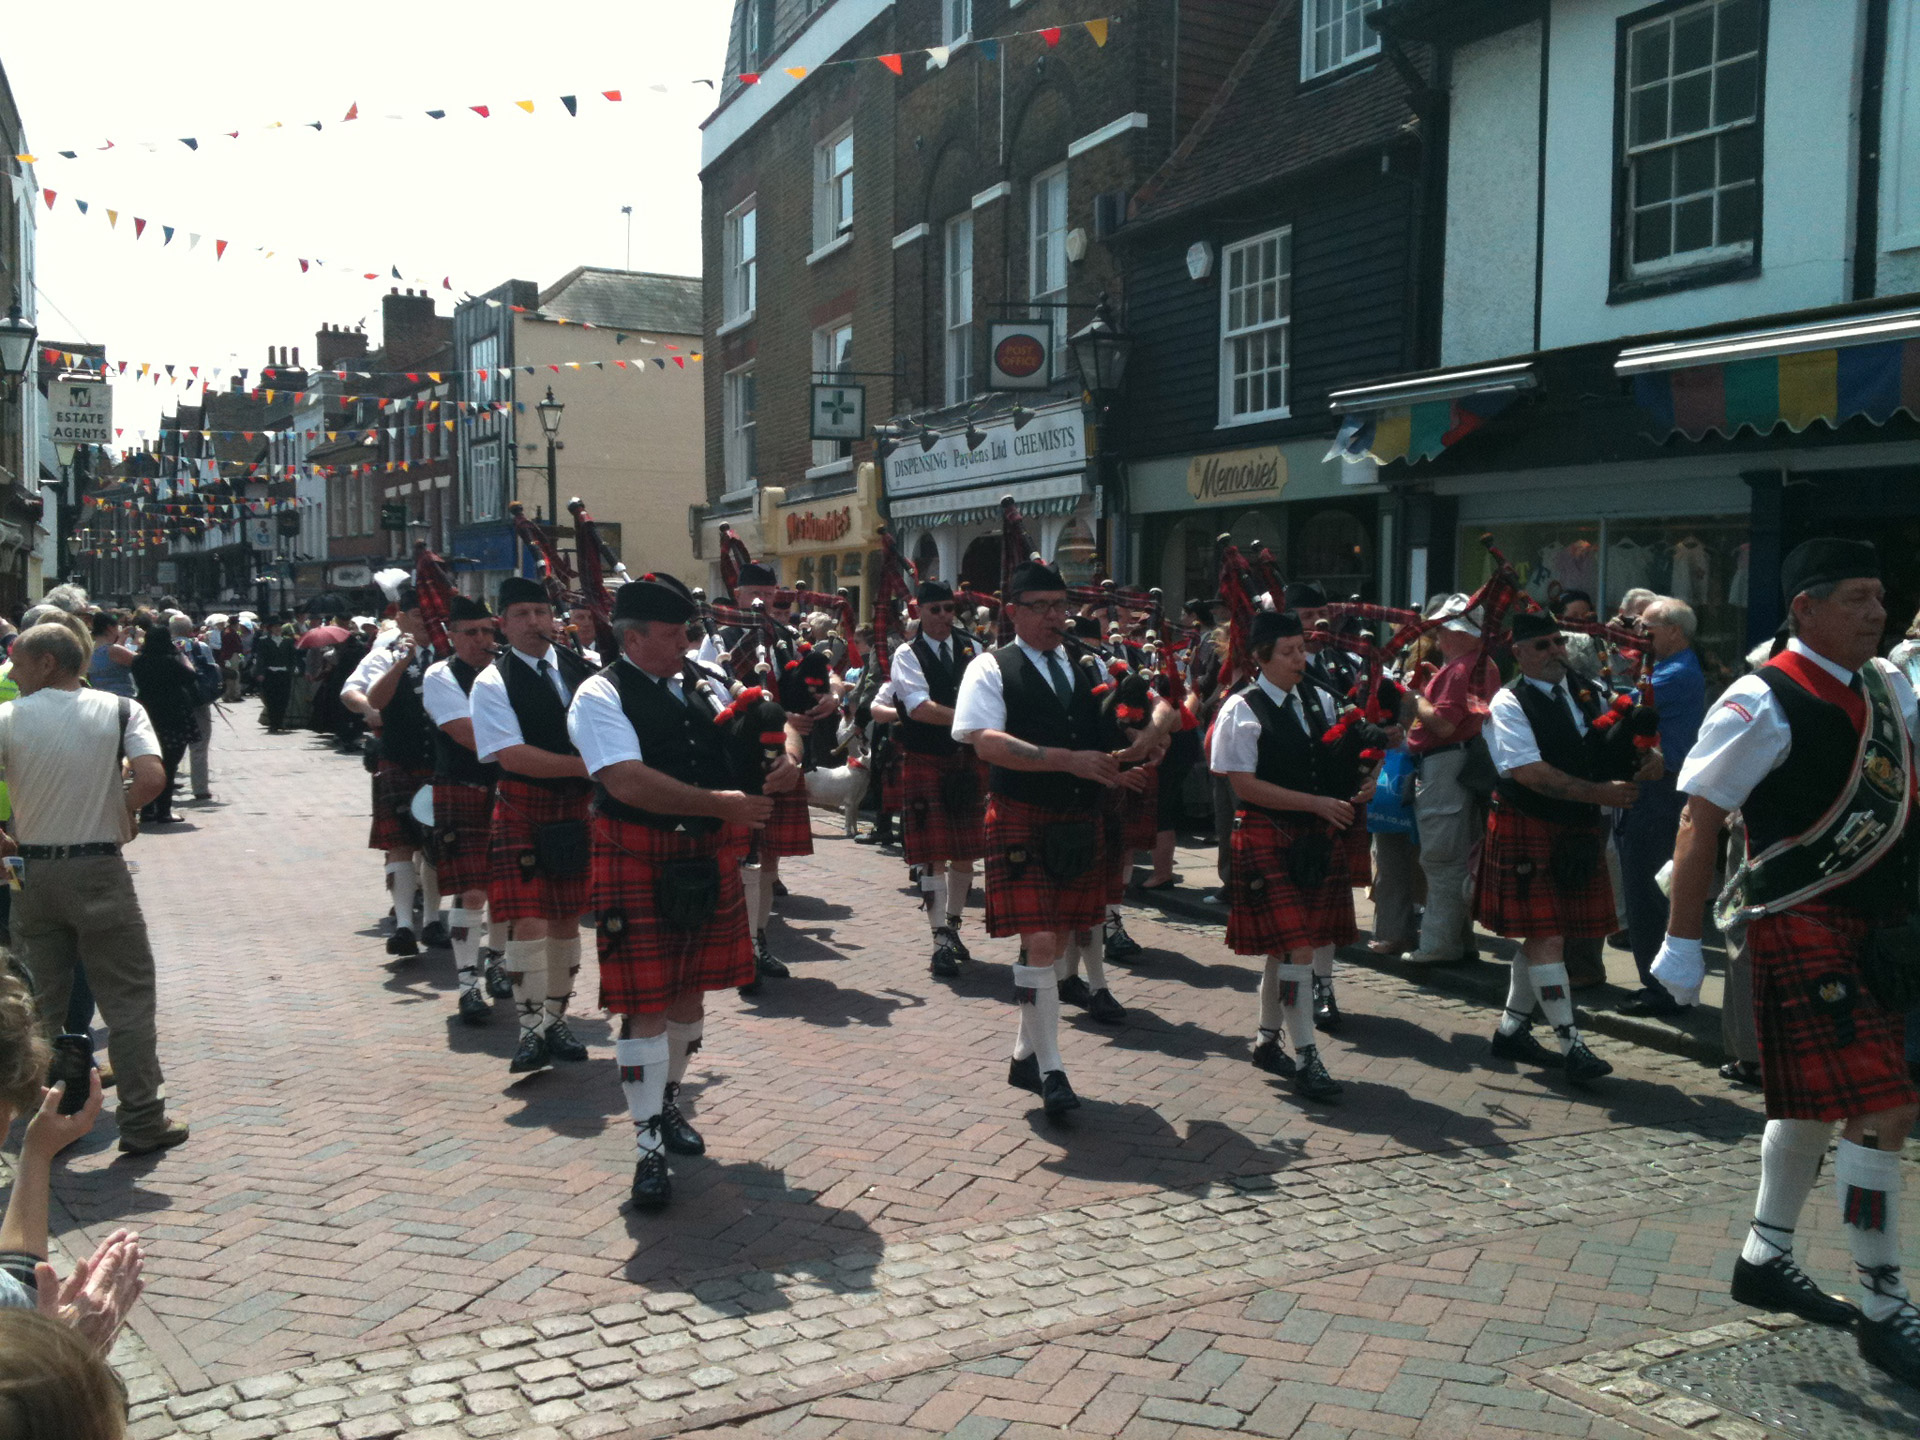 Bagpipers In Kilts